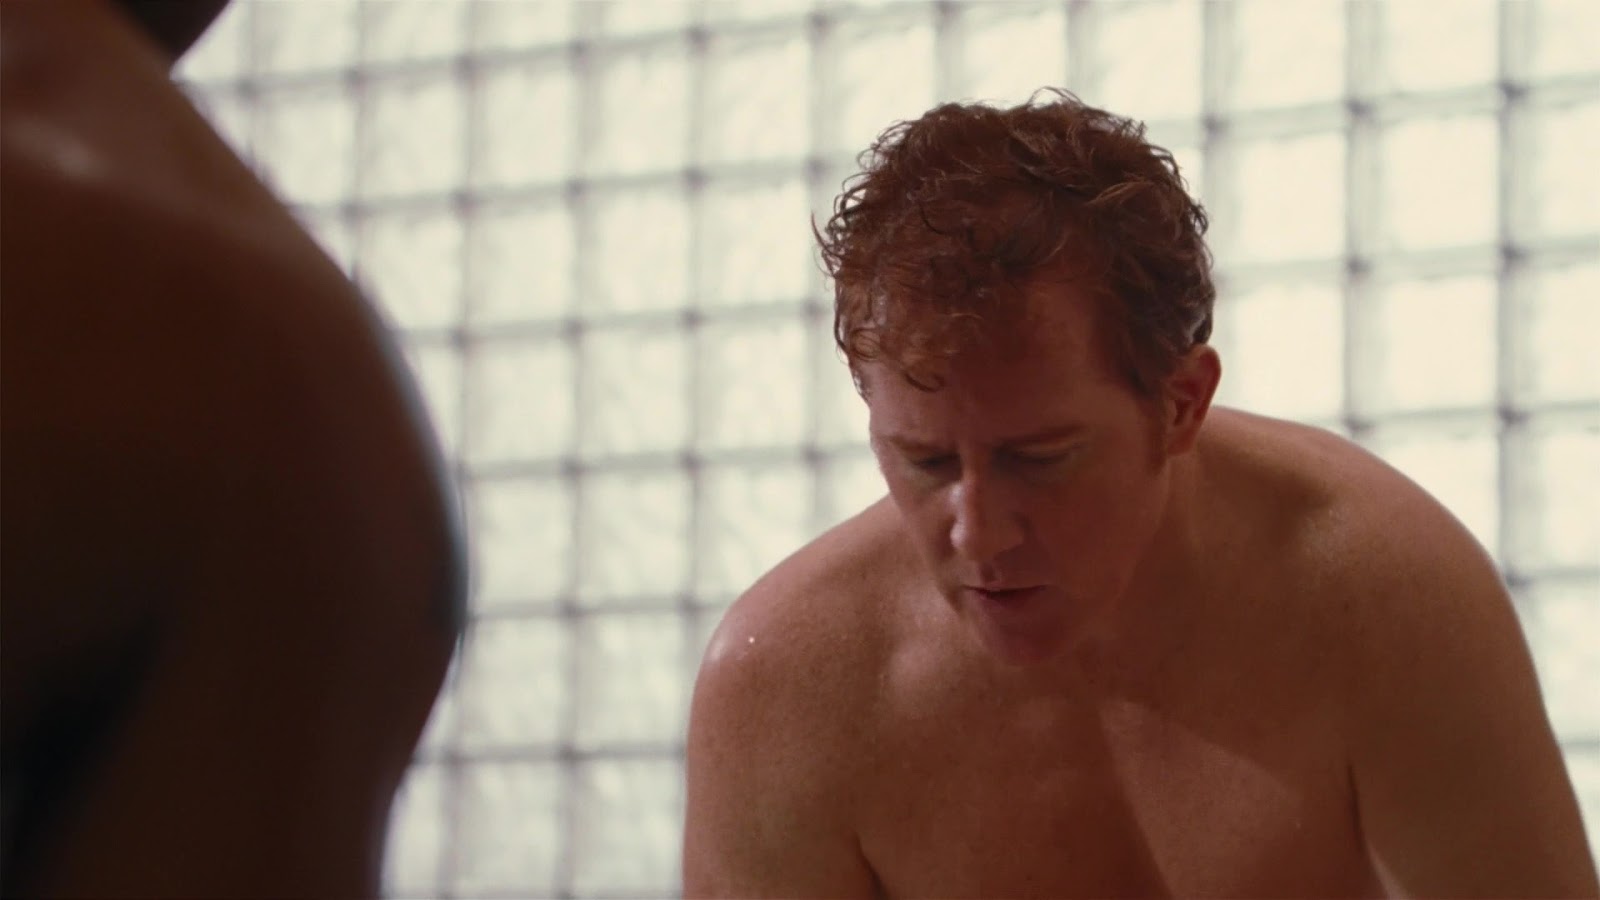 Thaddeus Rahming and Rich Brown nude in Hall Pass.